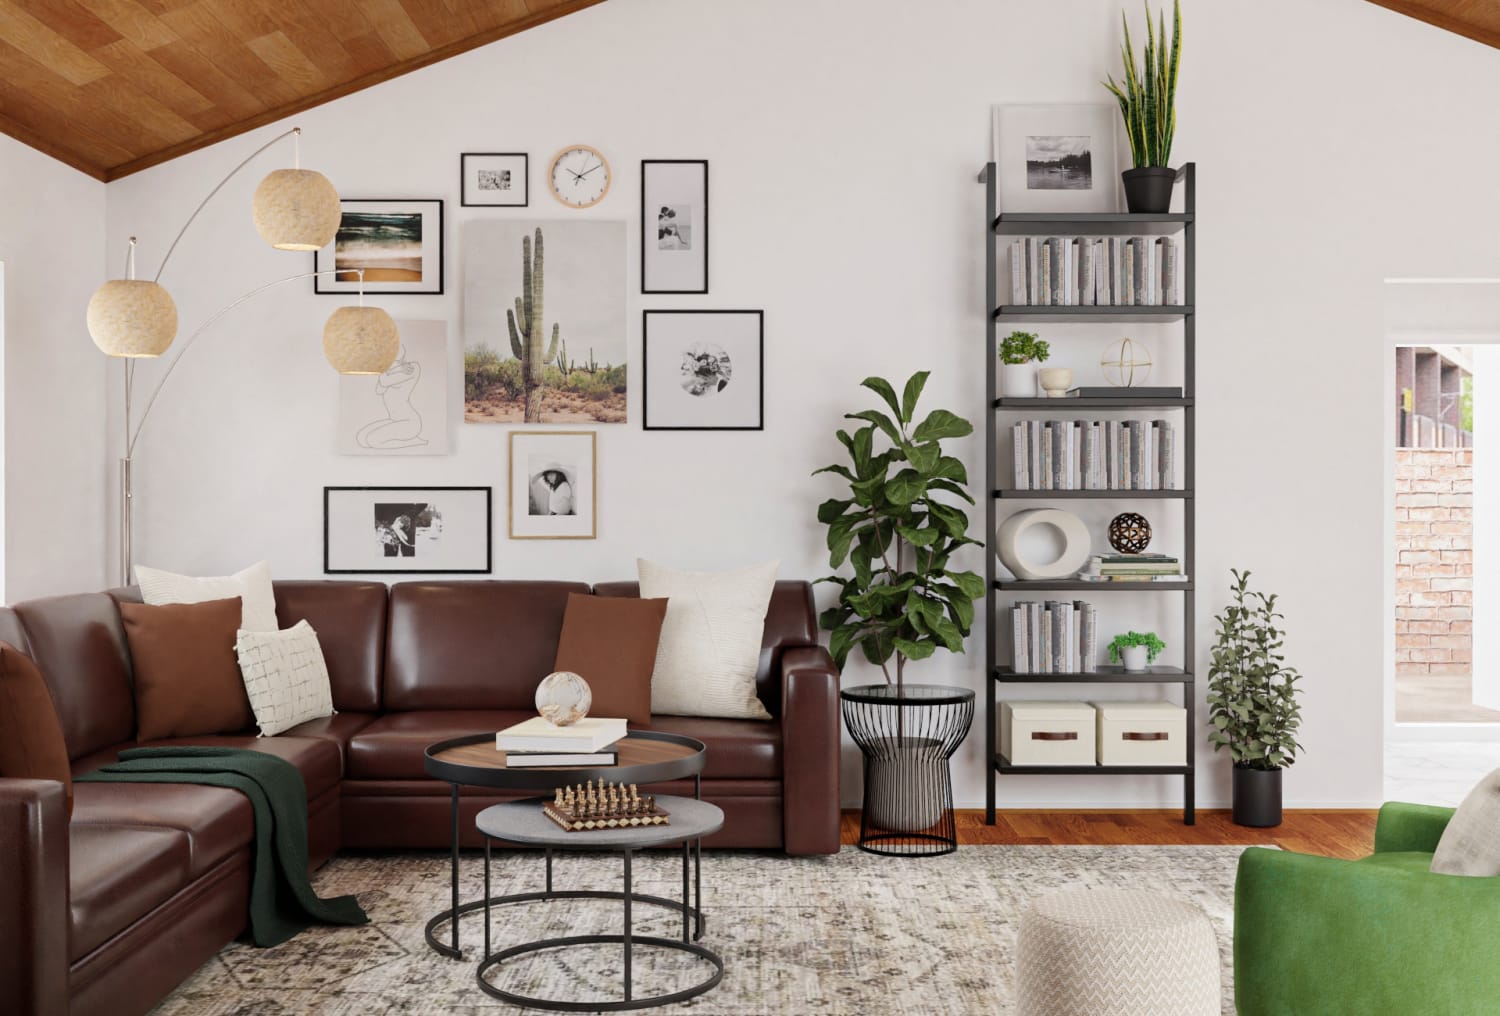 13 Small Living Room Ideas That Will Maximize Your Space